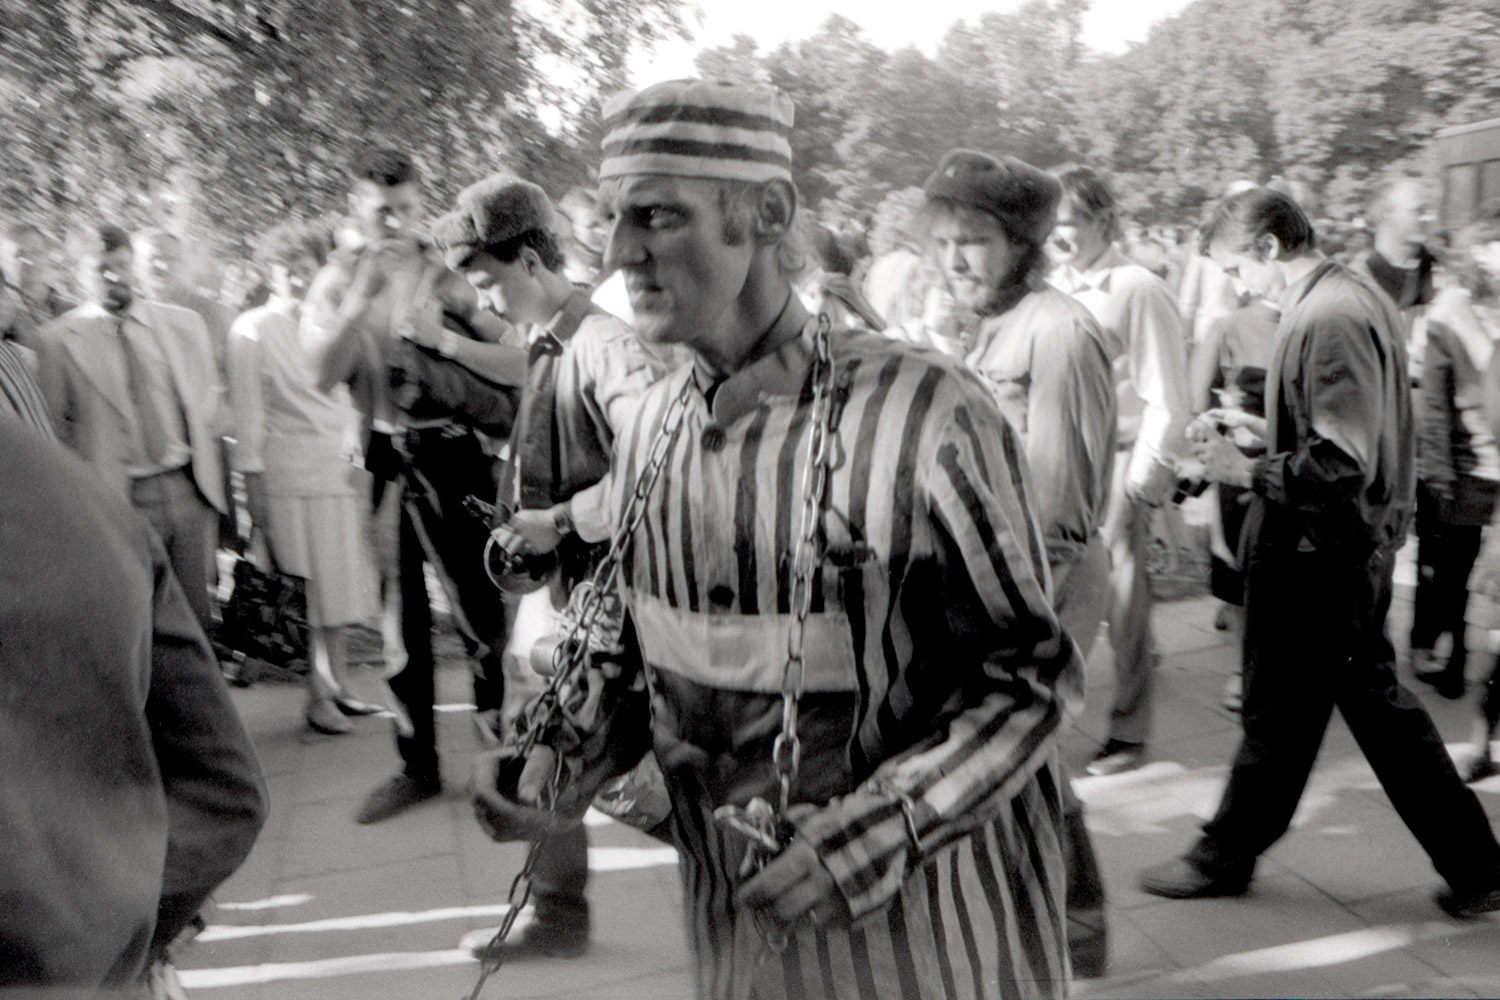 23/08/1989 – Theatricalised protest action in Gediminas Square (now – Cathedral Square) by the Lithuanian National Youth Union “Jaunoji Lietuva”, condemning the Molotov-Ribbentrop Pact. In the background: Algimantas Andreika, dressed in a prisoner’s uniform. LVCA, photographer: V. Kapočius.